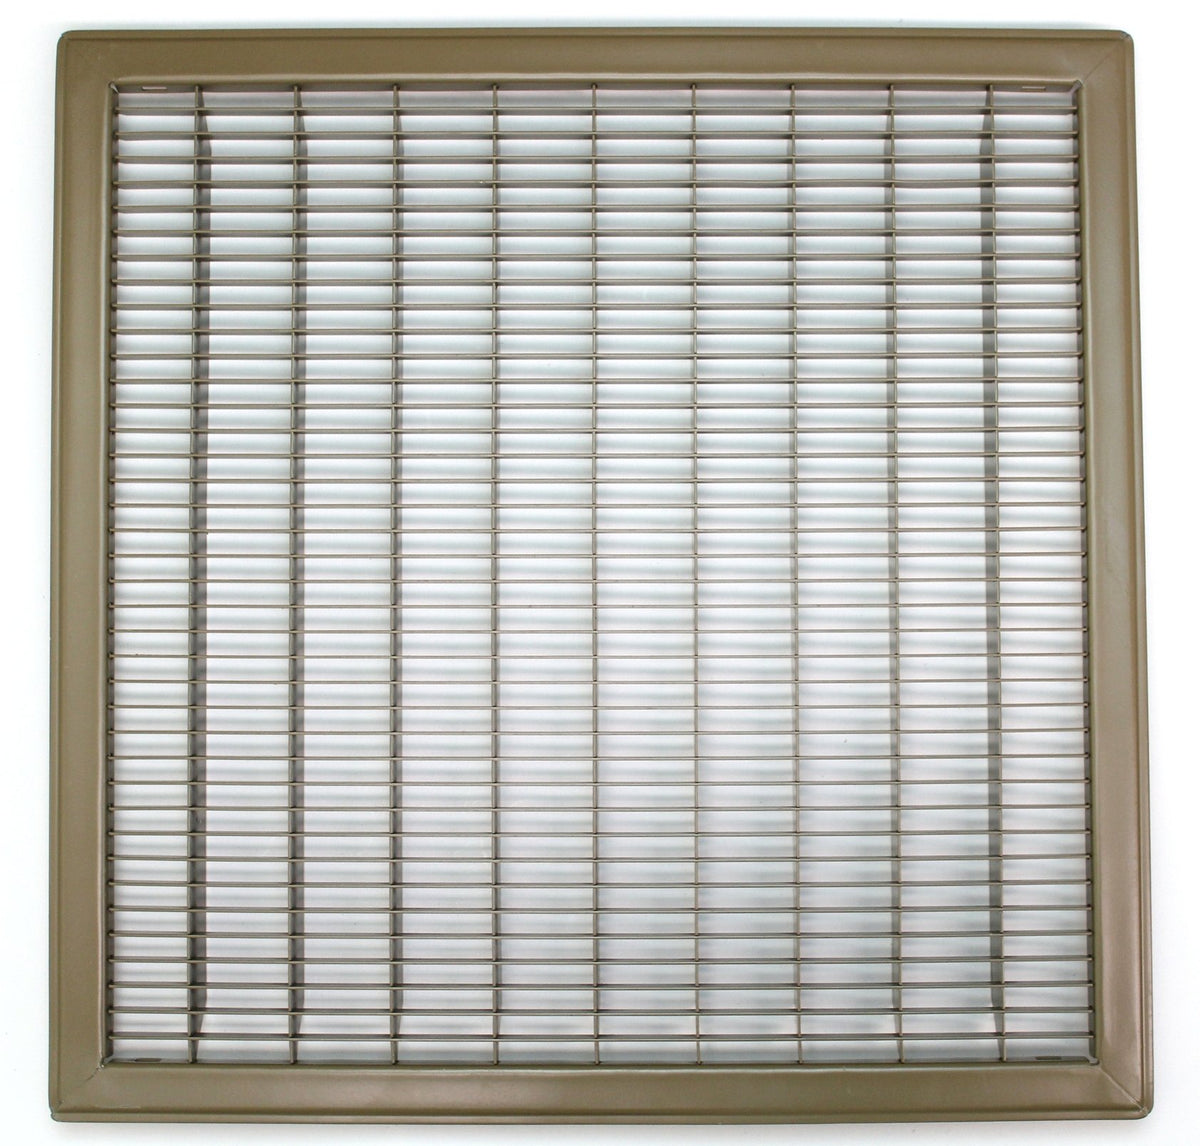 20&quot; X 14&quot; Or 14&quot; X 20&quot; Heavy Duty Floor Grille - Fixed Blades Air Grille- Brown [Outer Dimensions: 21.75 X 15.75]